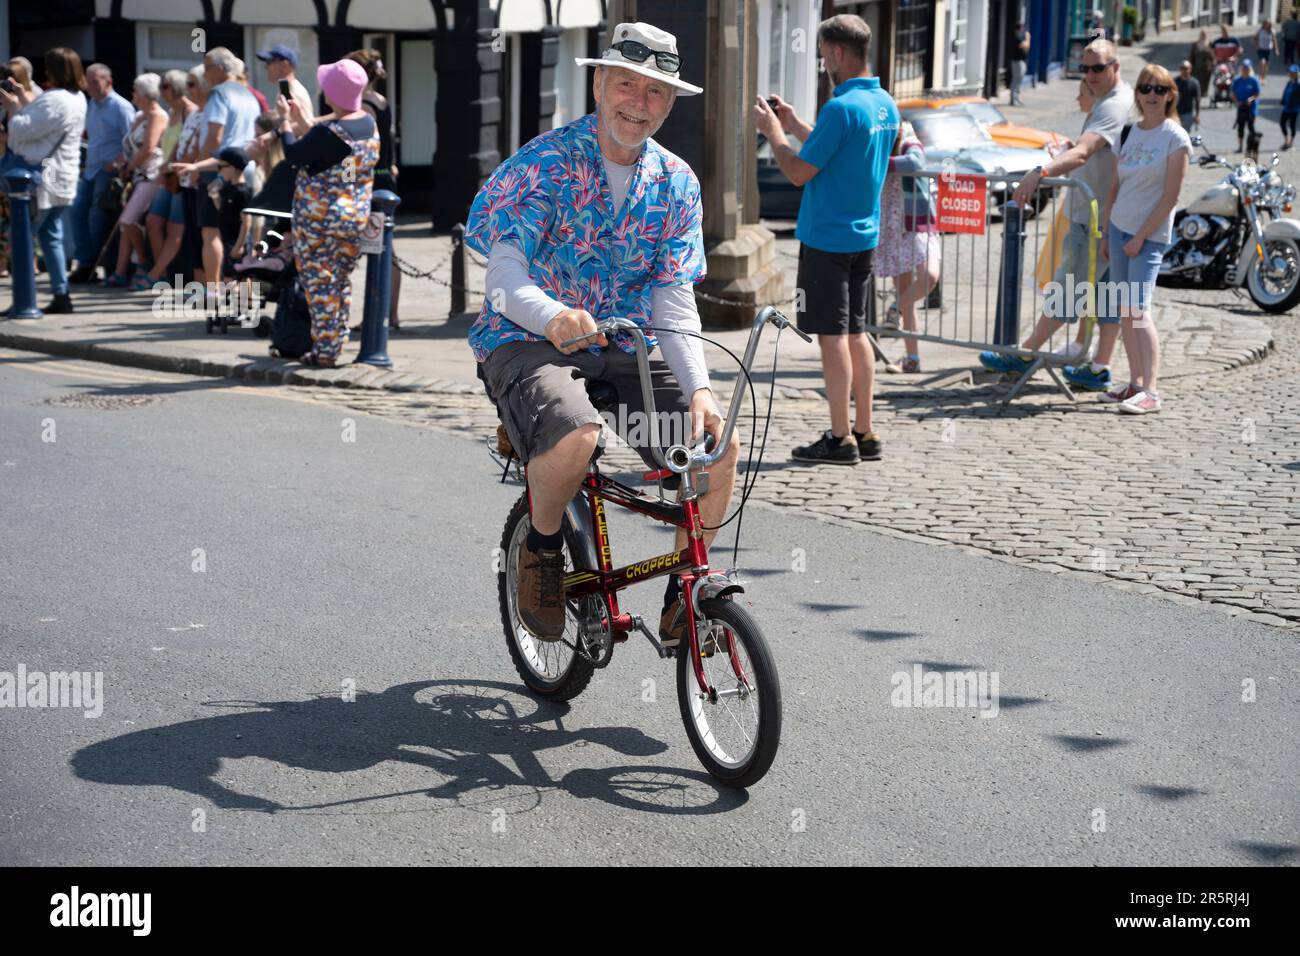 A man rides his childhood bike, a Raleigh Chopper from the 1960's, in the Veloretro vintage cycling event in Ulverston, Cumbria, UK. Stock Photo